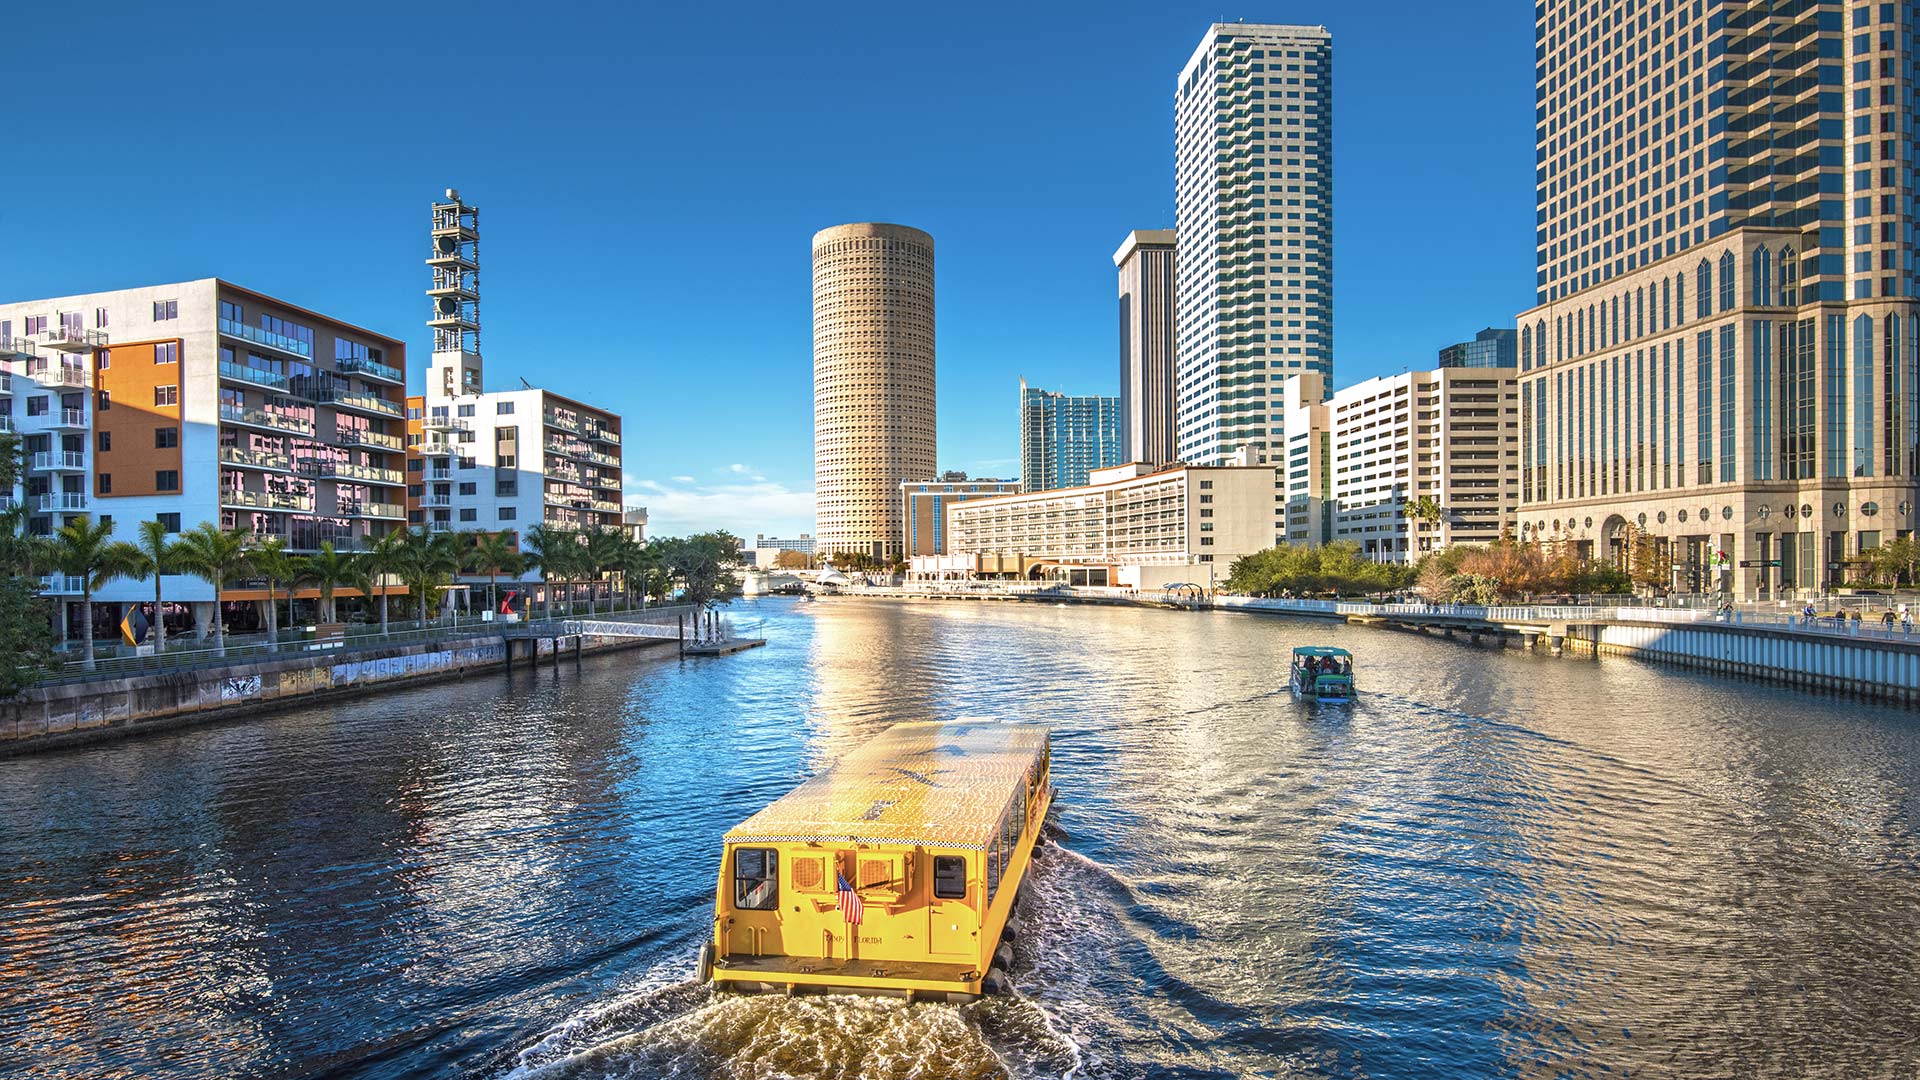 Water taxi in Tampa waterway